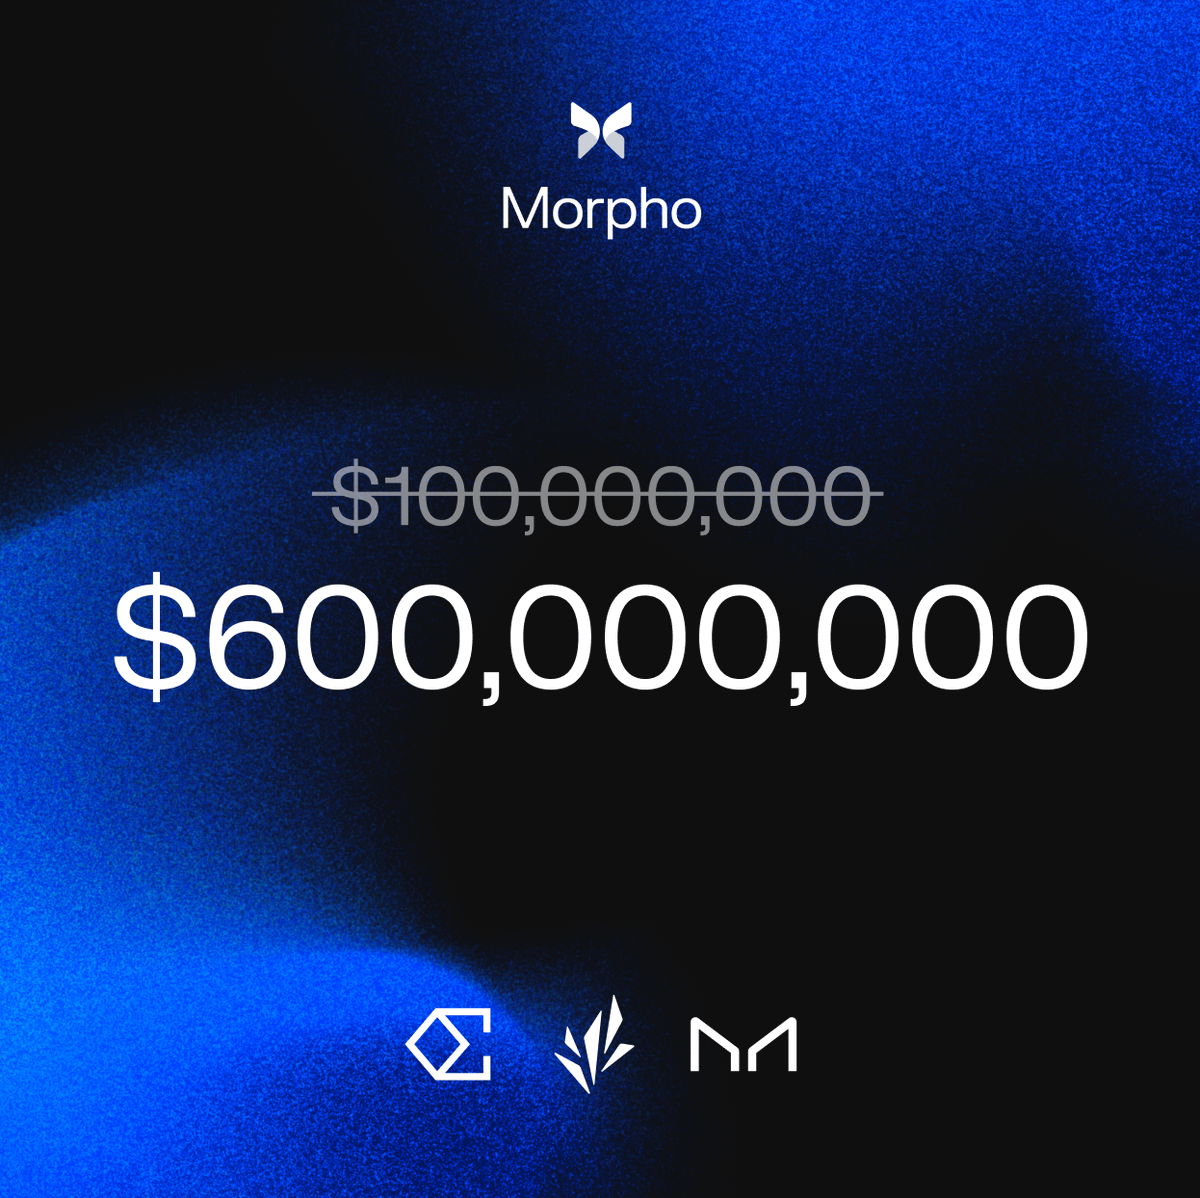 Morpho Blue was designed to be a foundational layer of DeFi. Last week's integration with @MakerDAO, @sparkdotfi, and @ethena_labs helps cement this.